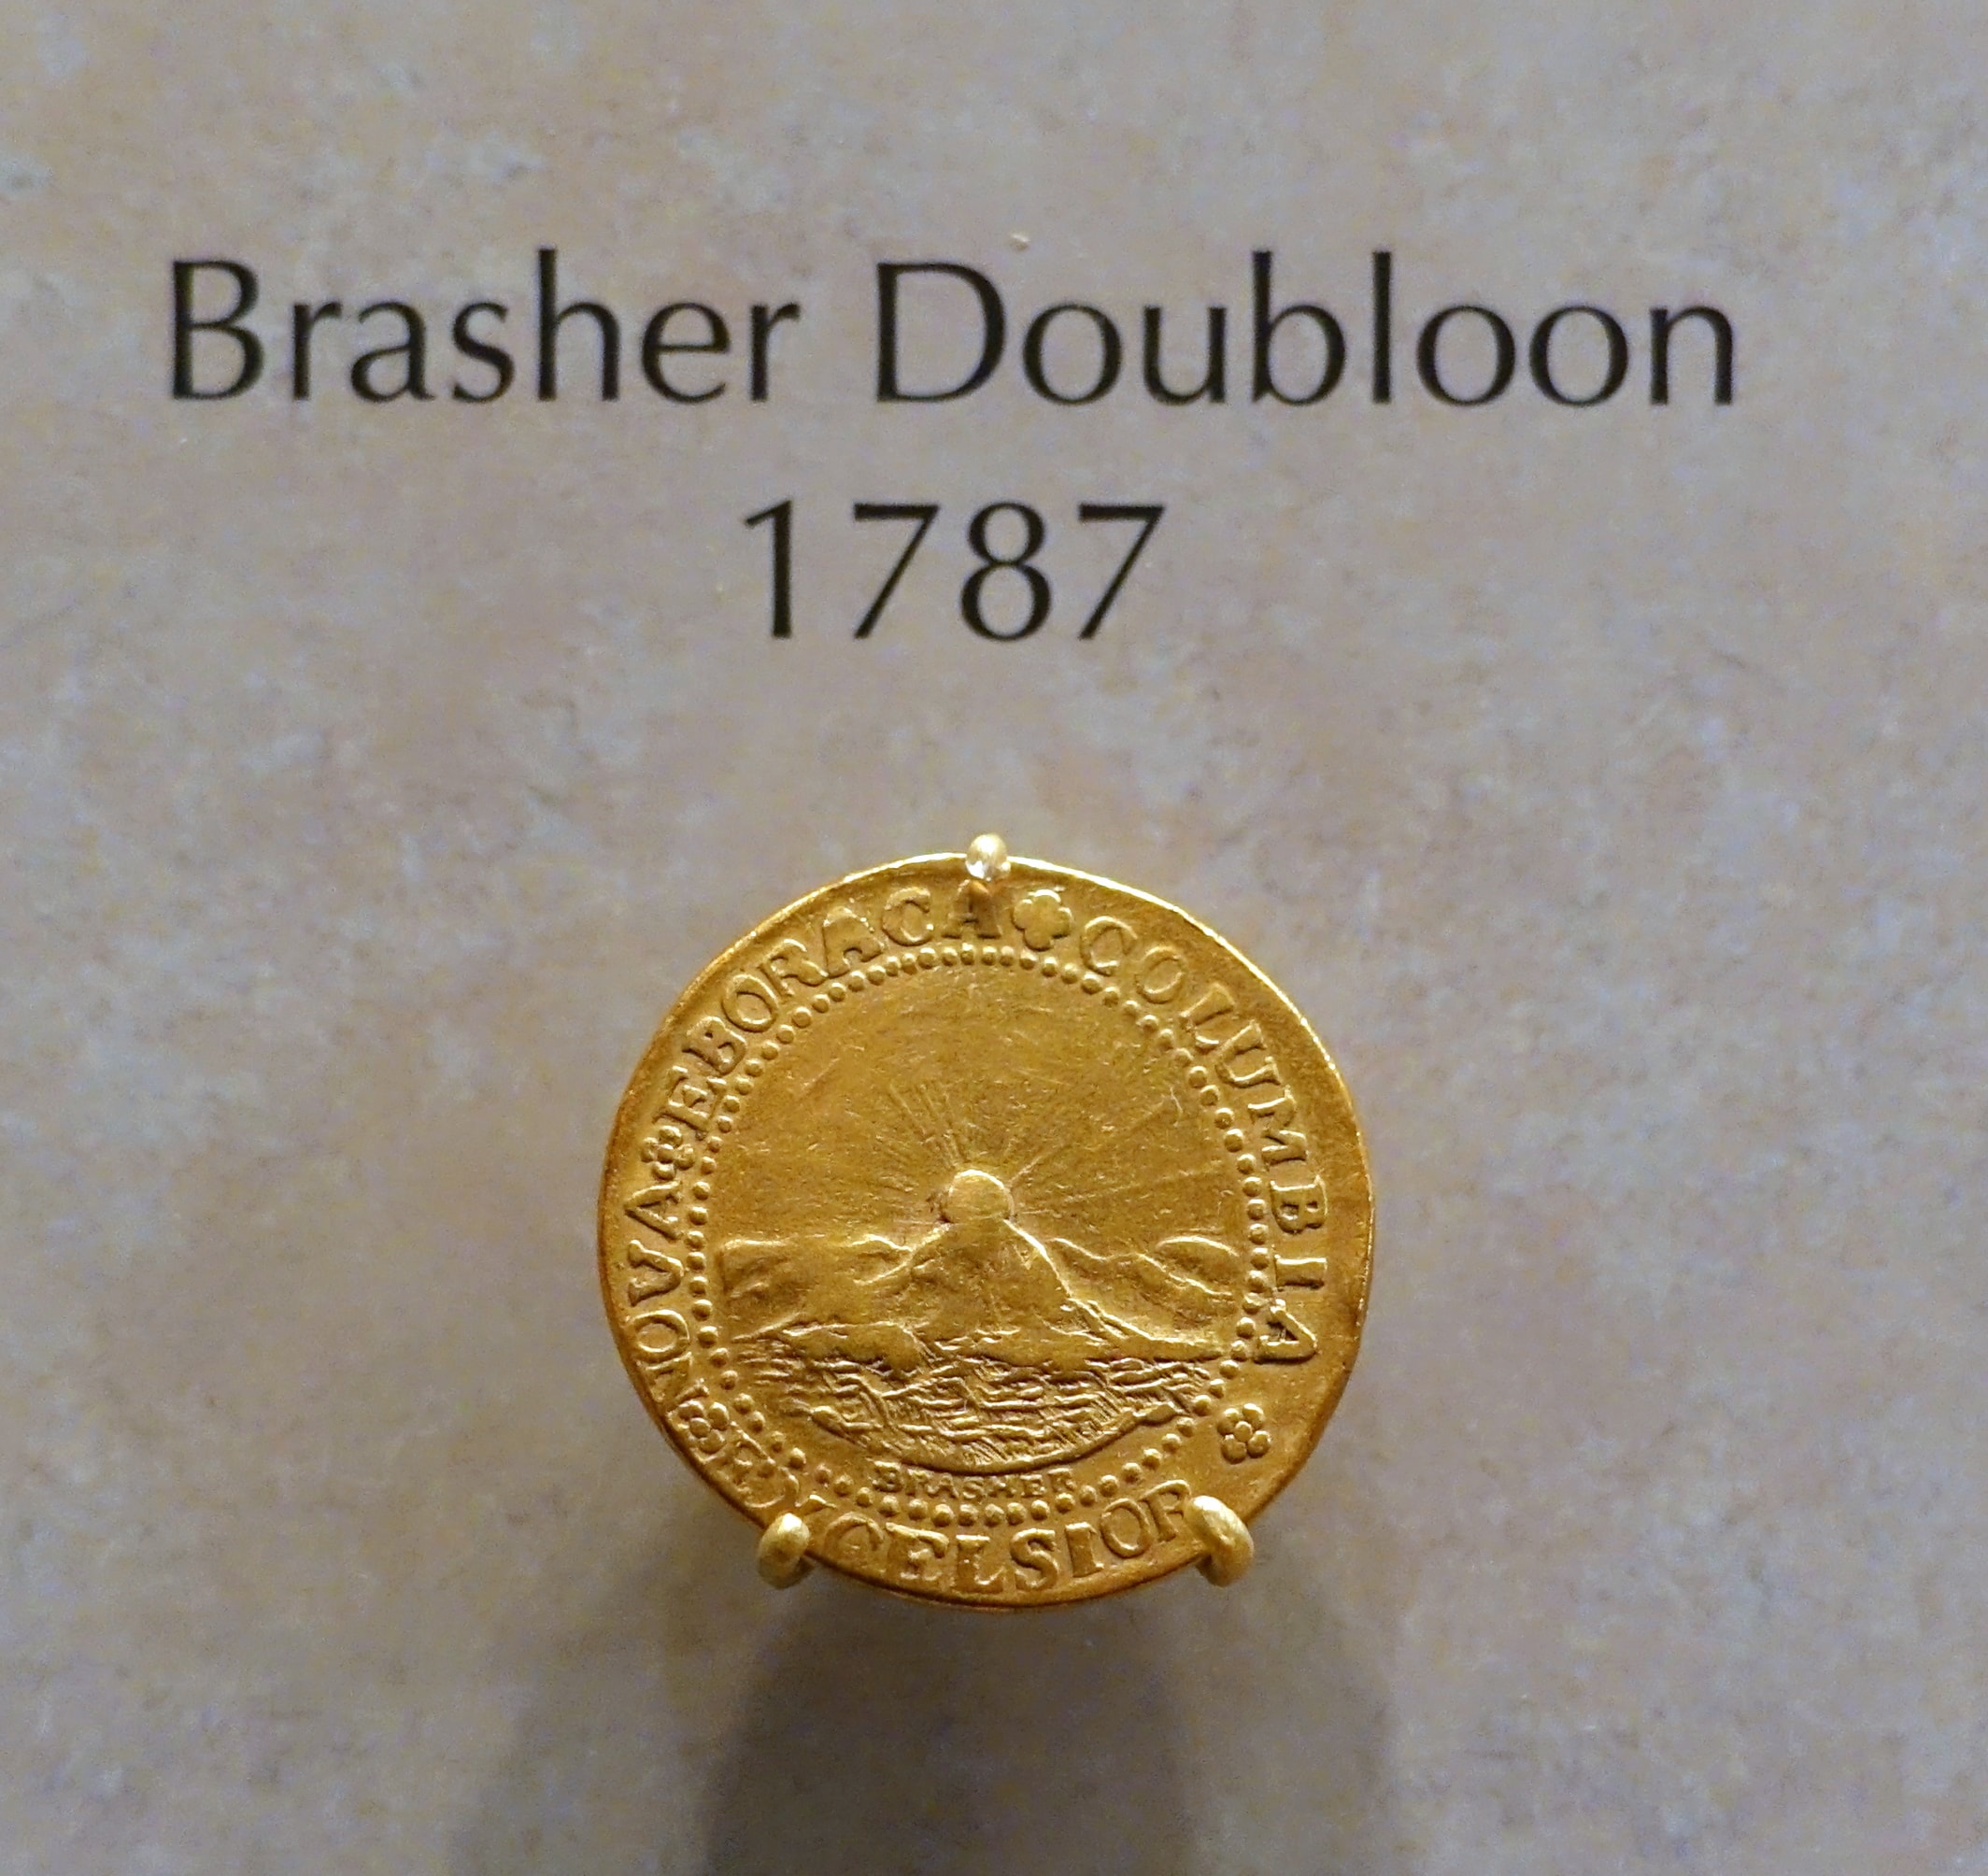 The 1787 Brasher Doubloon: Most Expensive Coins